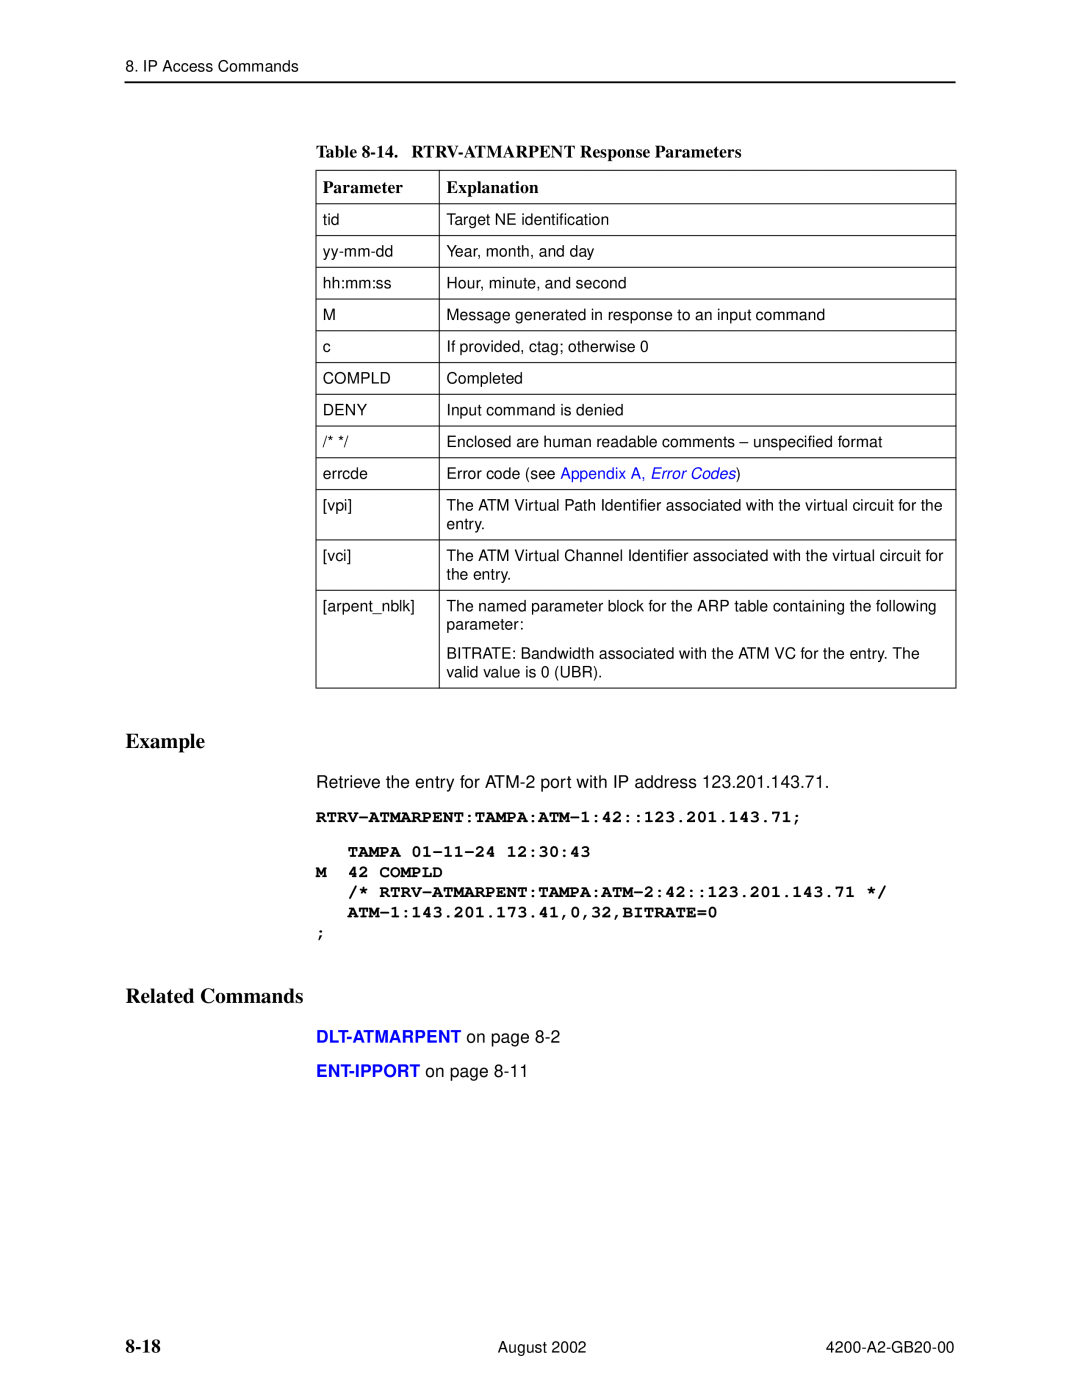 Paradyne 4200 8-18, 14. RTRV-ATMARPENT Response Parameters, Example, Related Commands, Explanation, DLT-ATMARPENT on page 